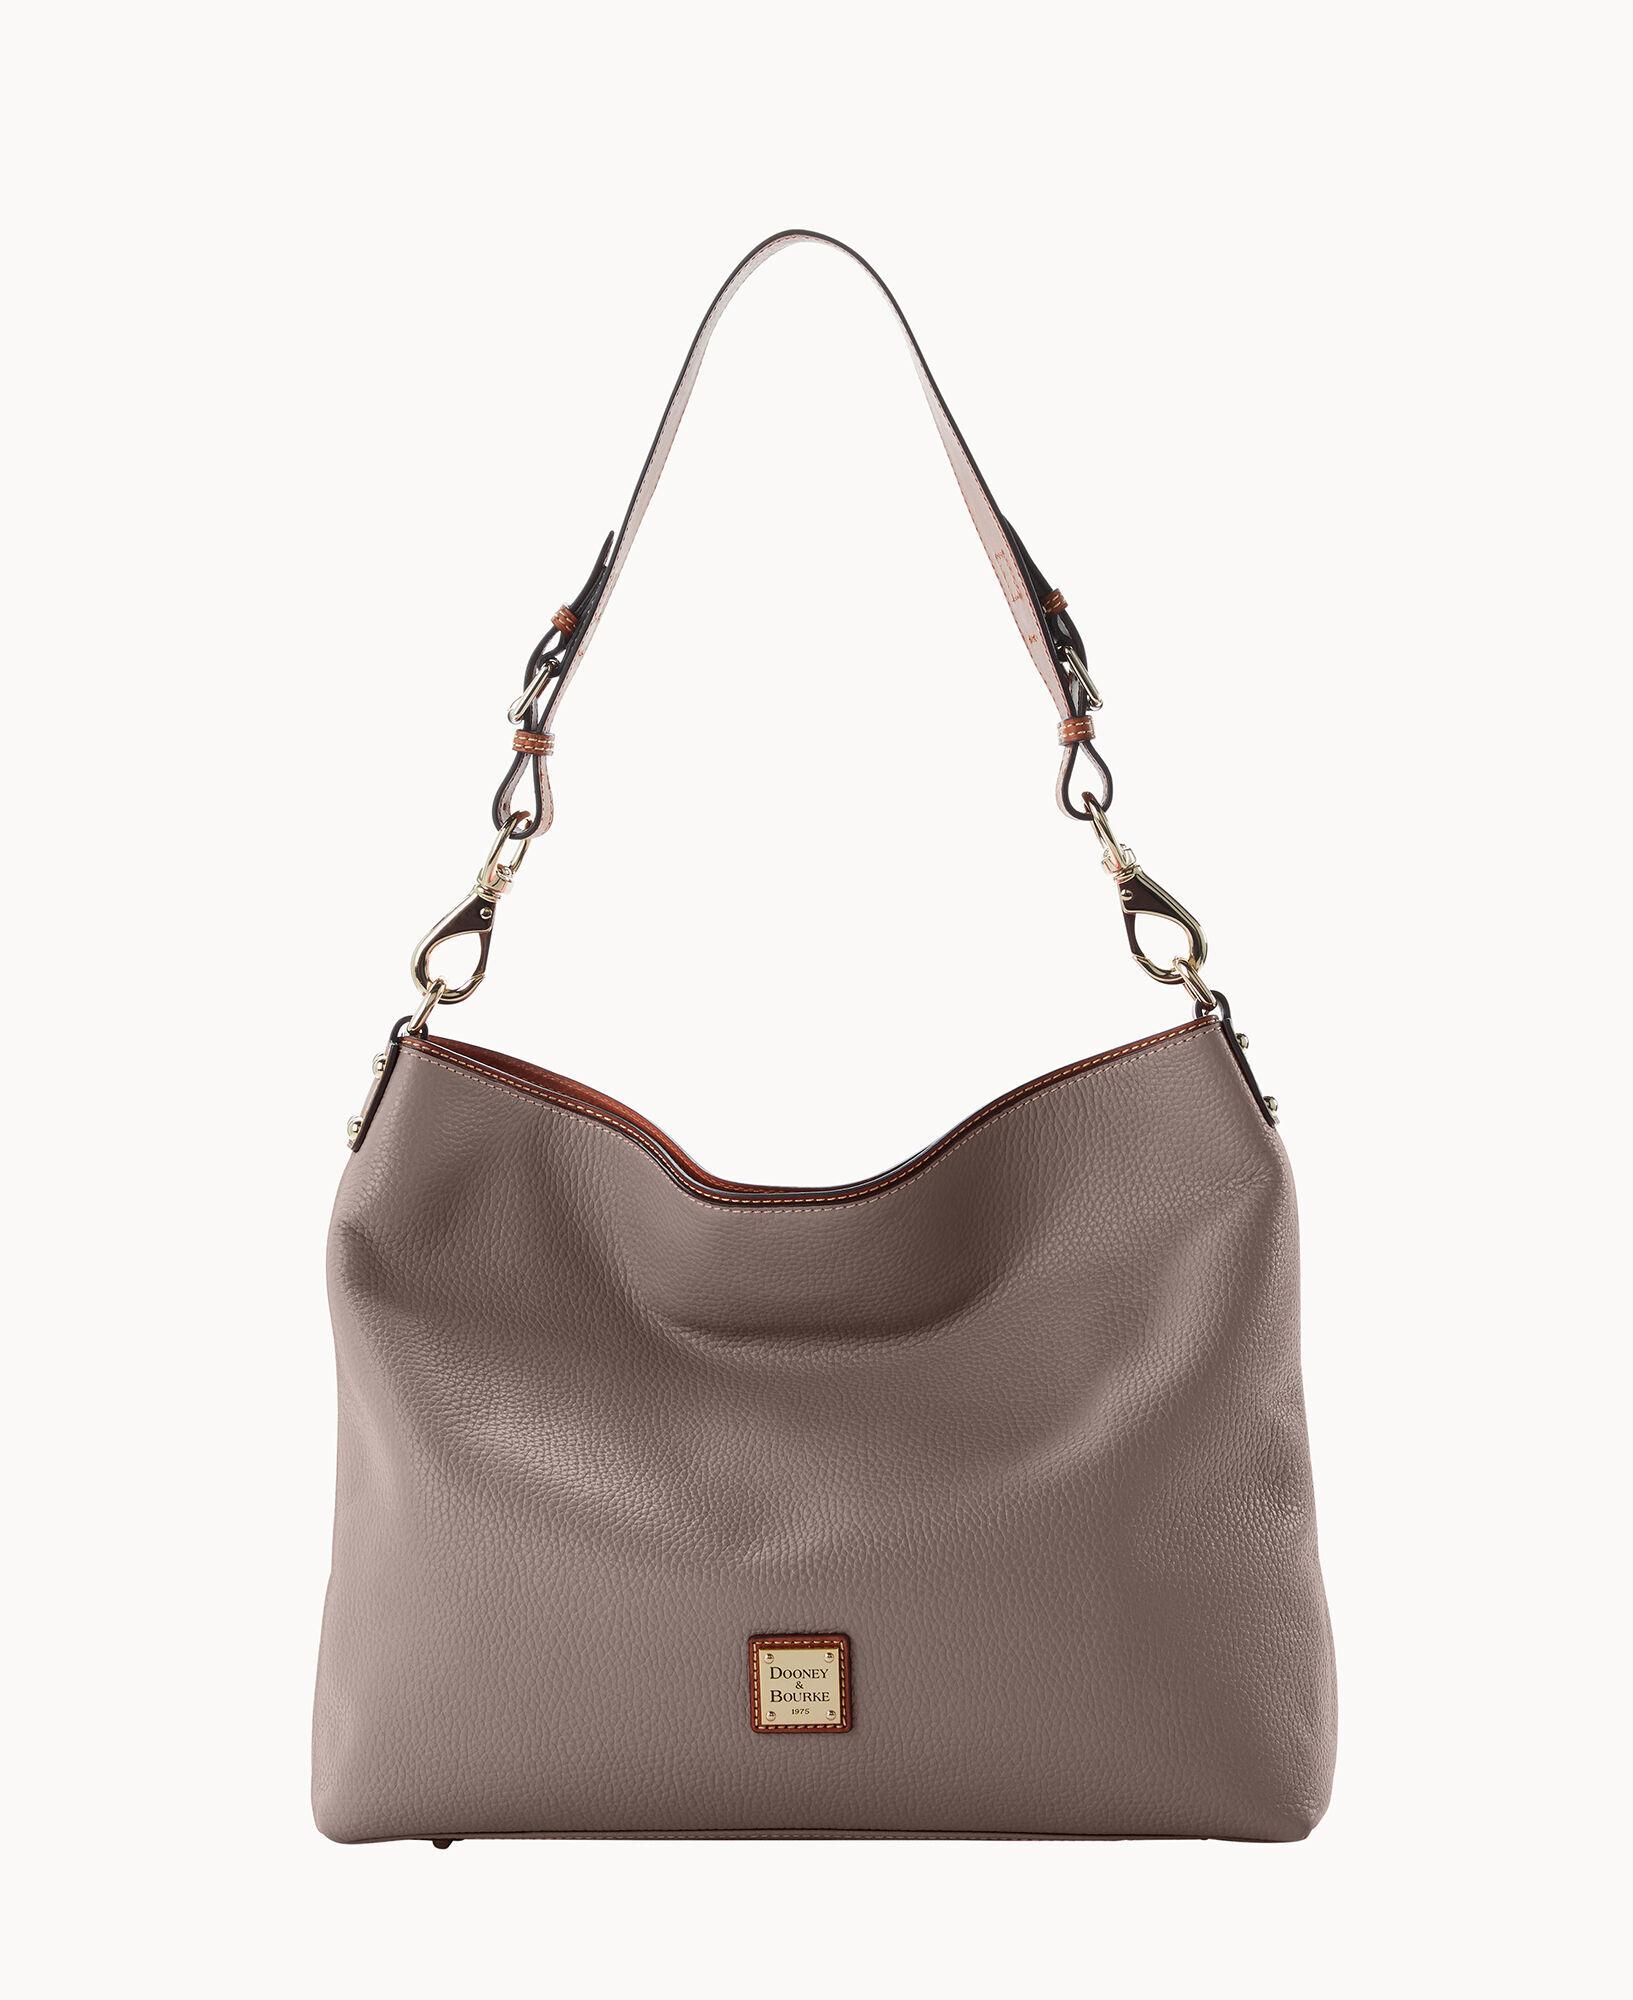 Dooney & Bourke Pebble Grain Extra Large Courtney Sac in Brown | Lyst